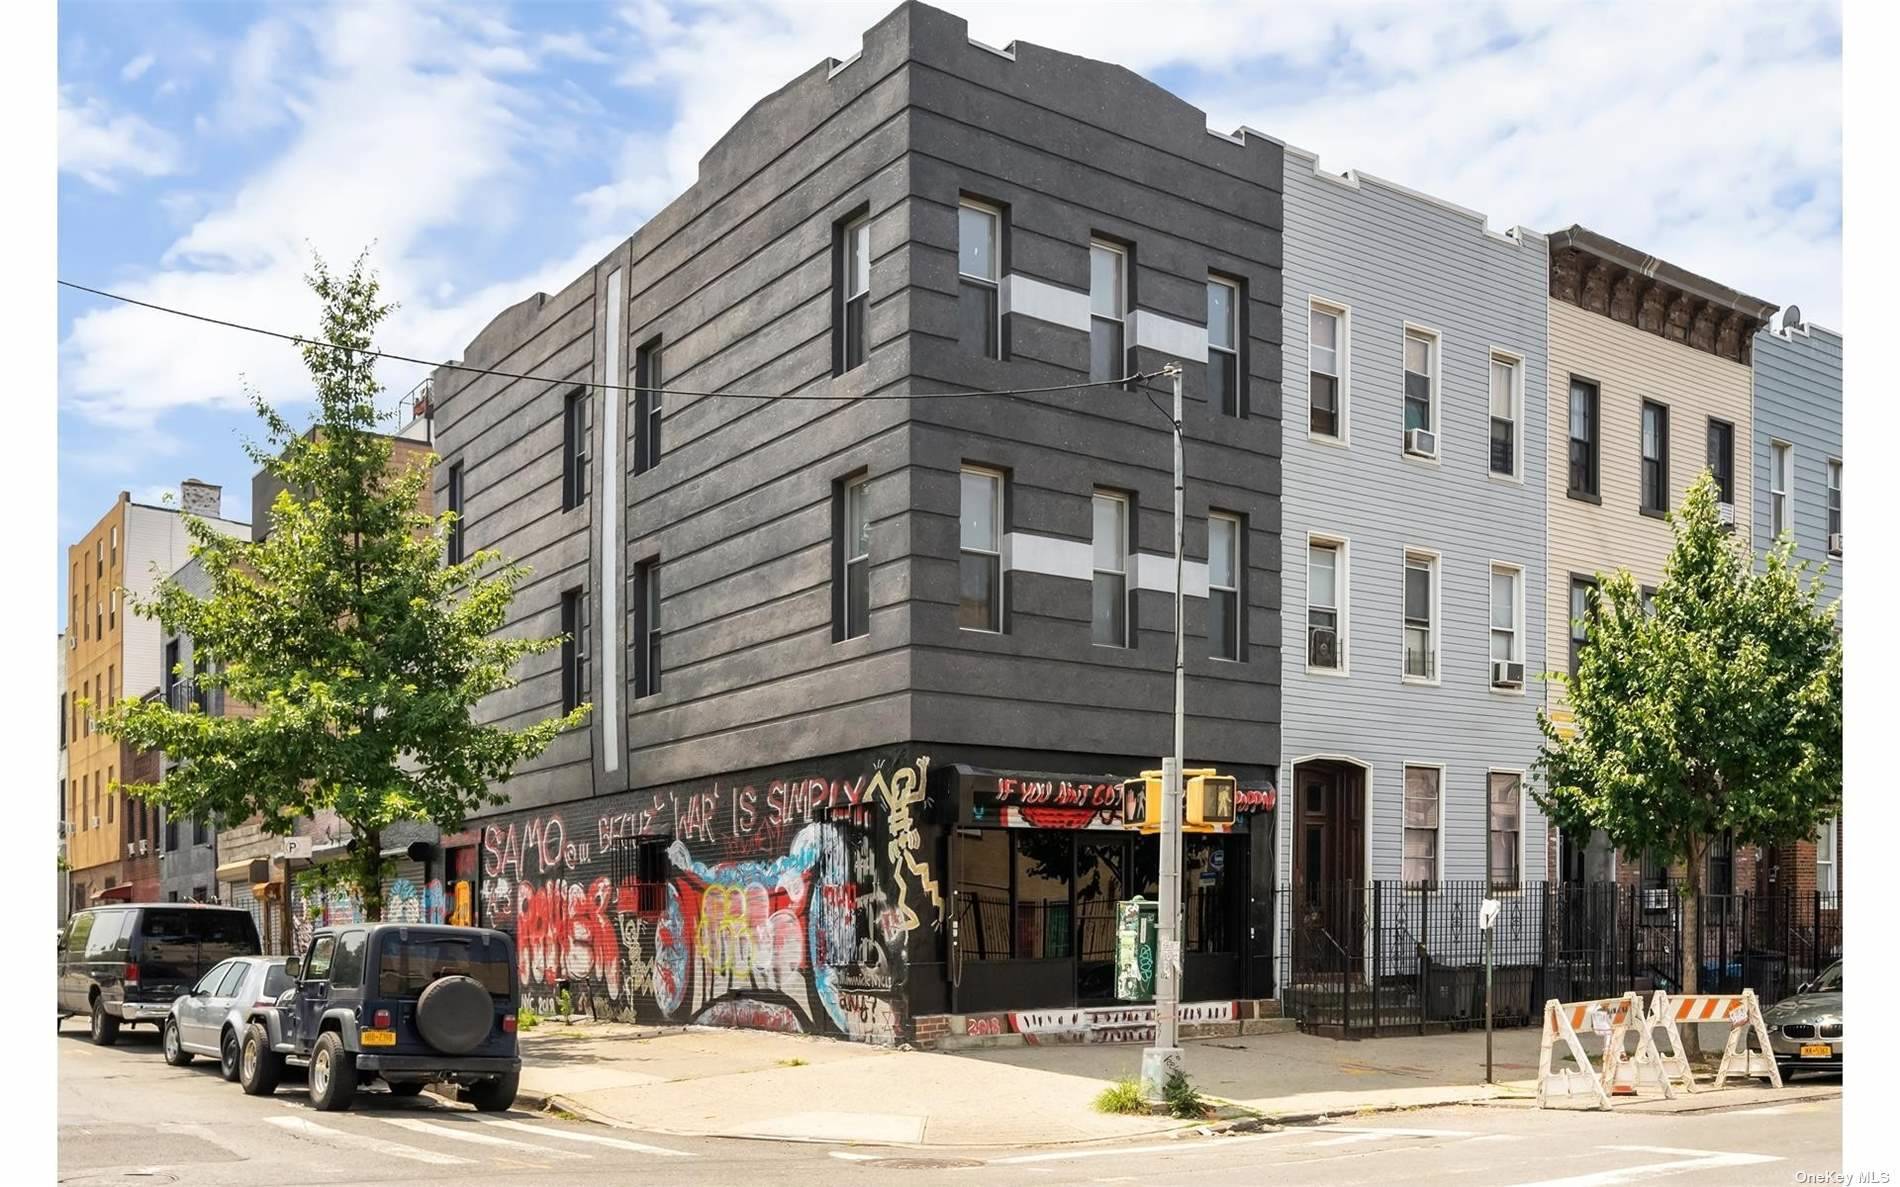 Phenomenal opportunity to purchase this great 3 story building located on a corner lot directly in the epicenter of the booming Bushwick cultural scene, intersecting Wilson Avenue and Troutman Street.